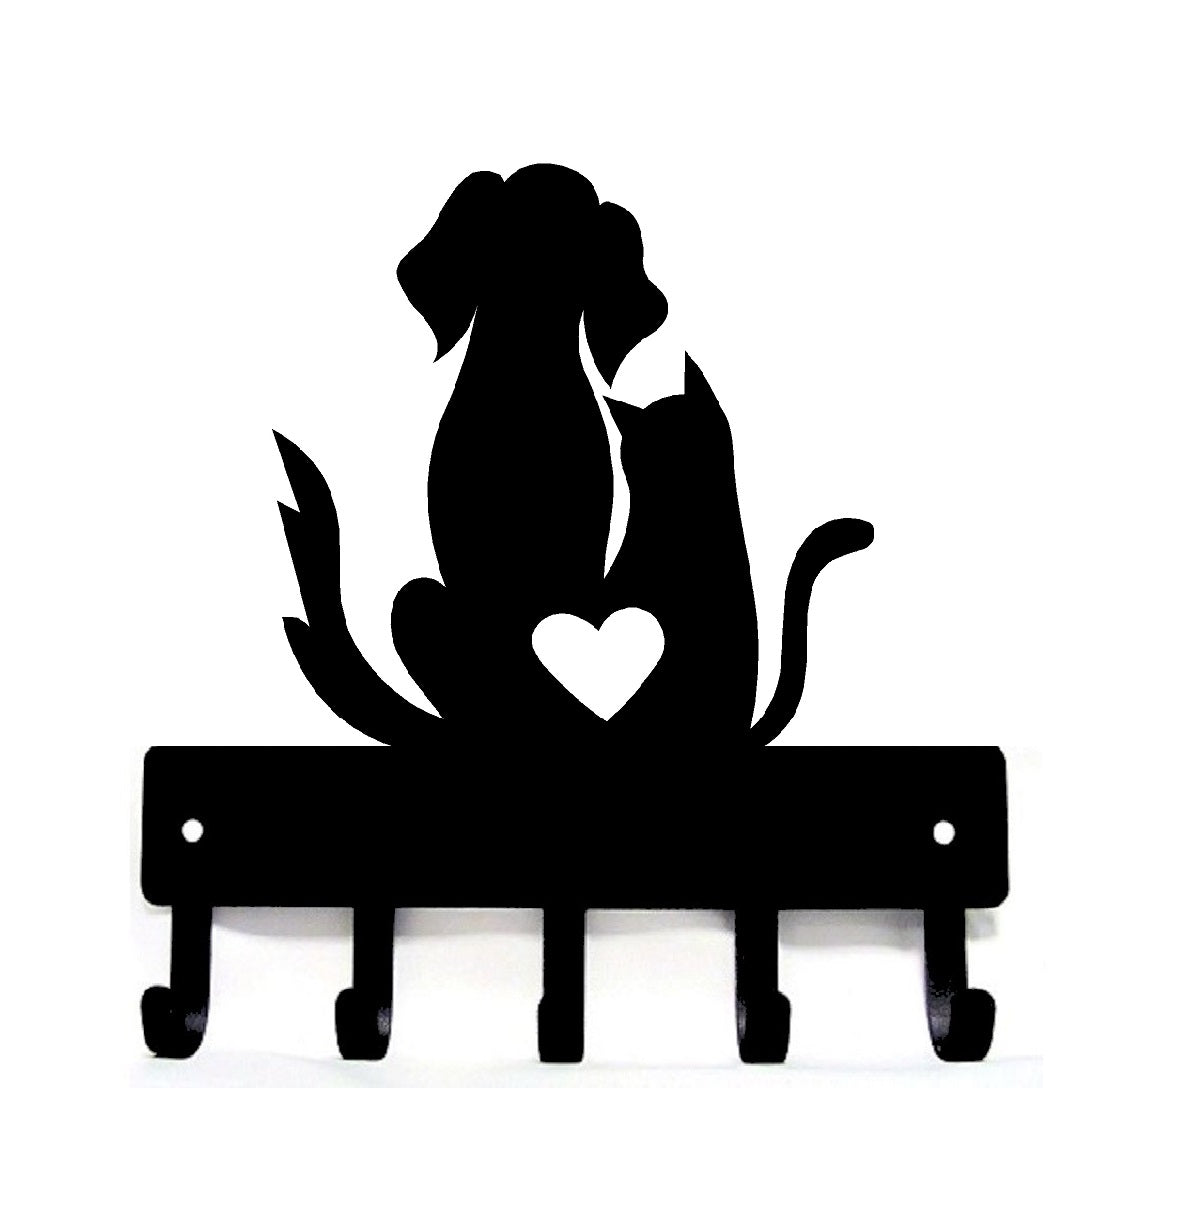 Dog & Cat ❤️ Key Rack with 5 hooks - The Metal Peddler Key Rack Cat, dog, key rack, leash hanger, leash rack, not-dog